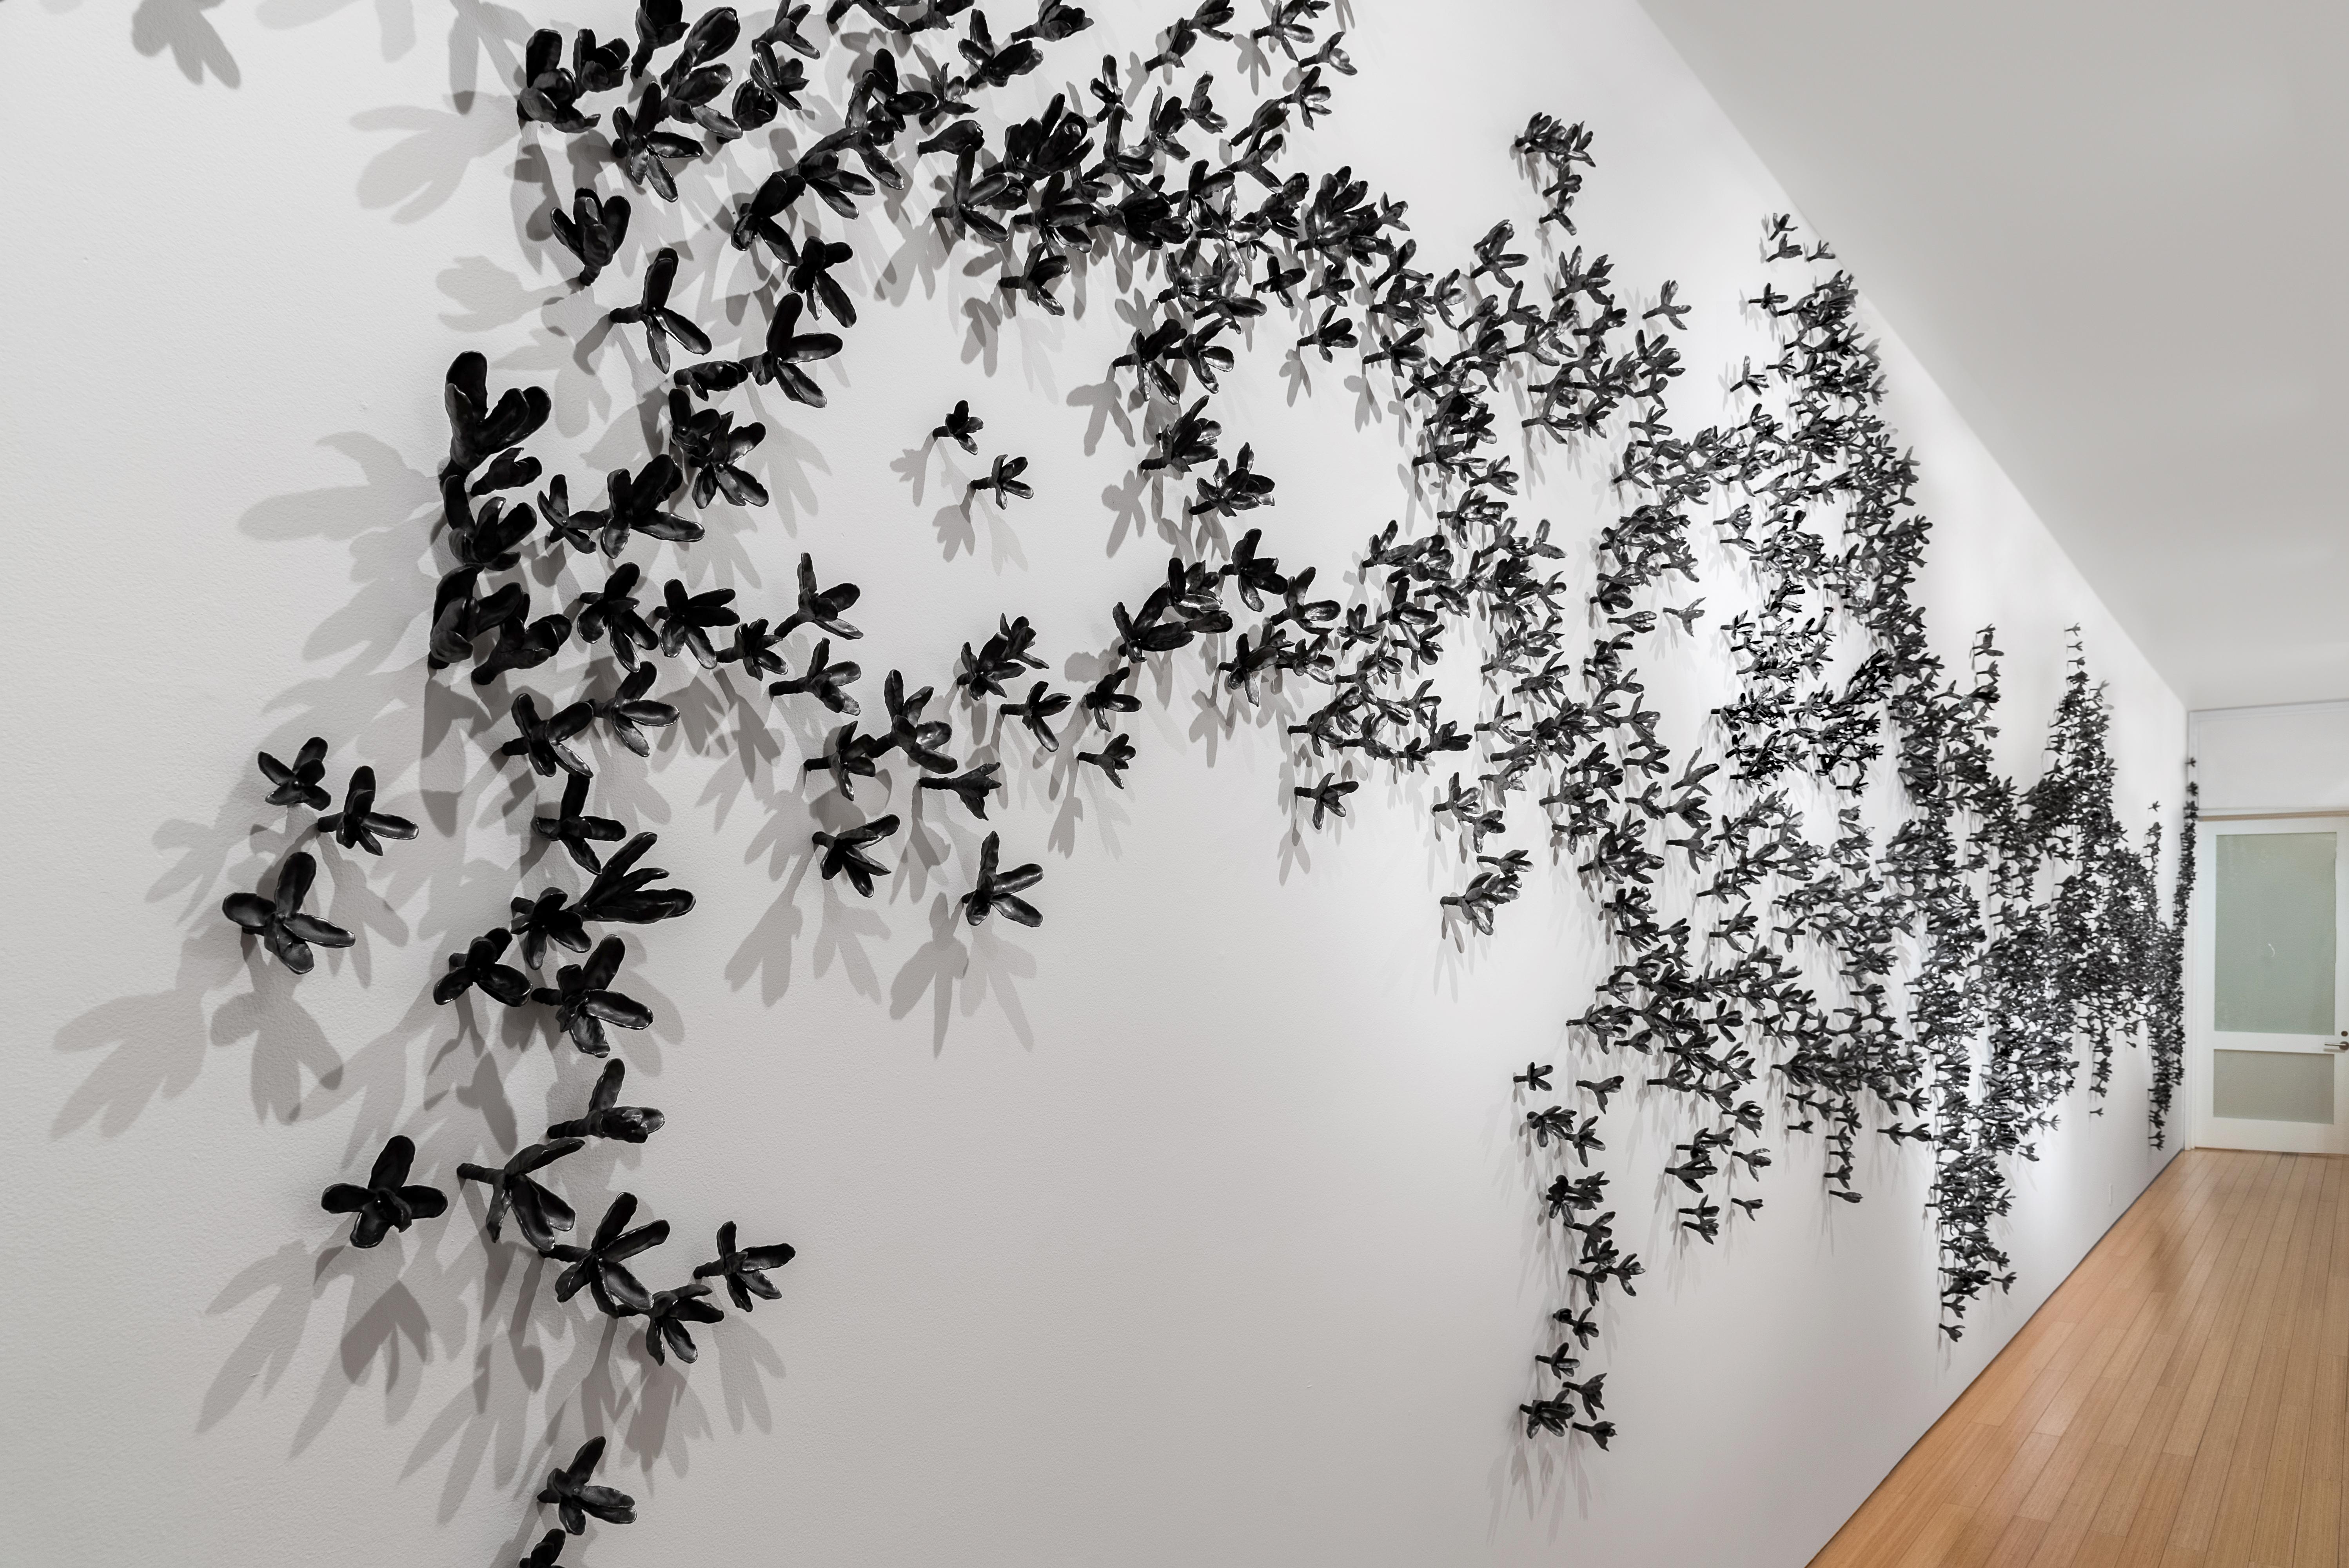 Floral Wall Installation Wrought Iron, 2020 (available as individual sets) - Sculpture by Bradley Sabin